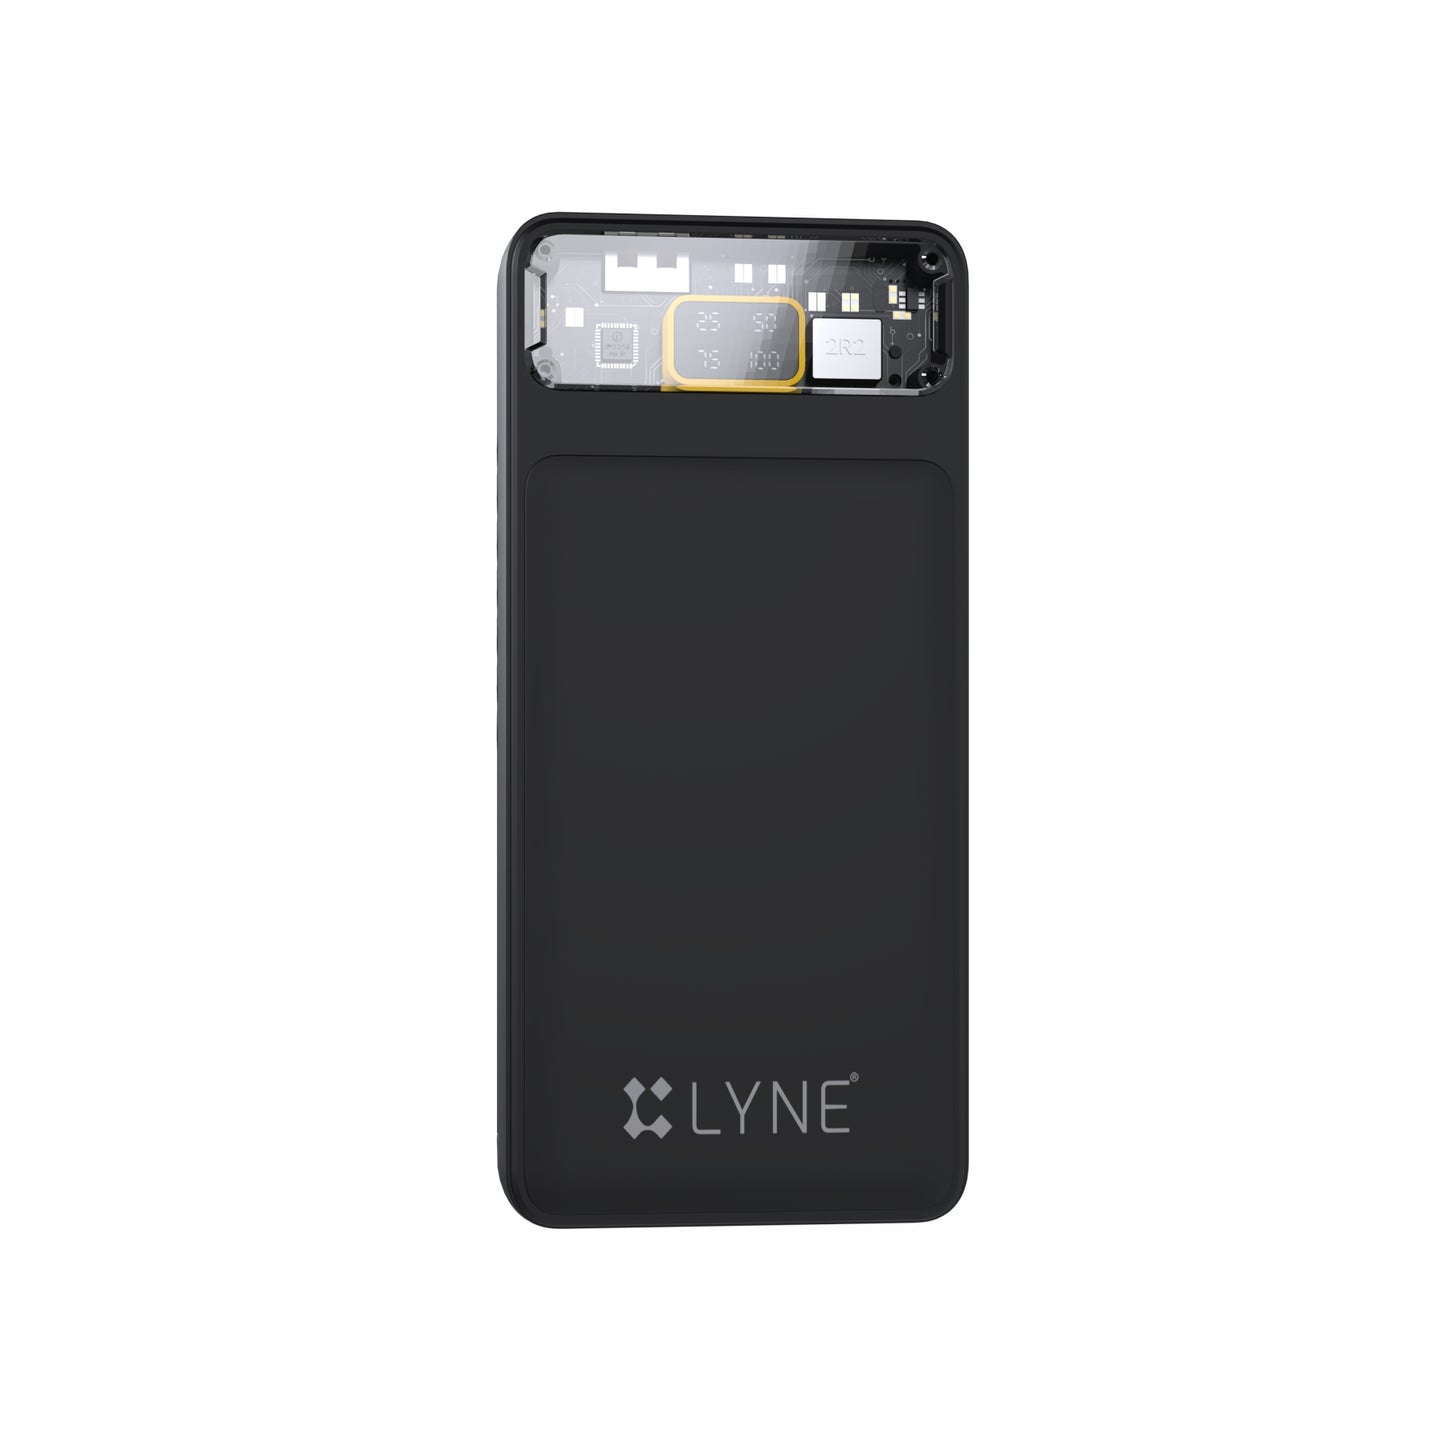 LYNE Powerbox 23 20000 mAh Battery Capacity with Built-in Cables